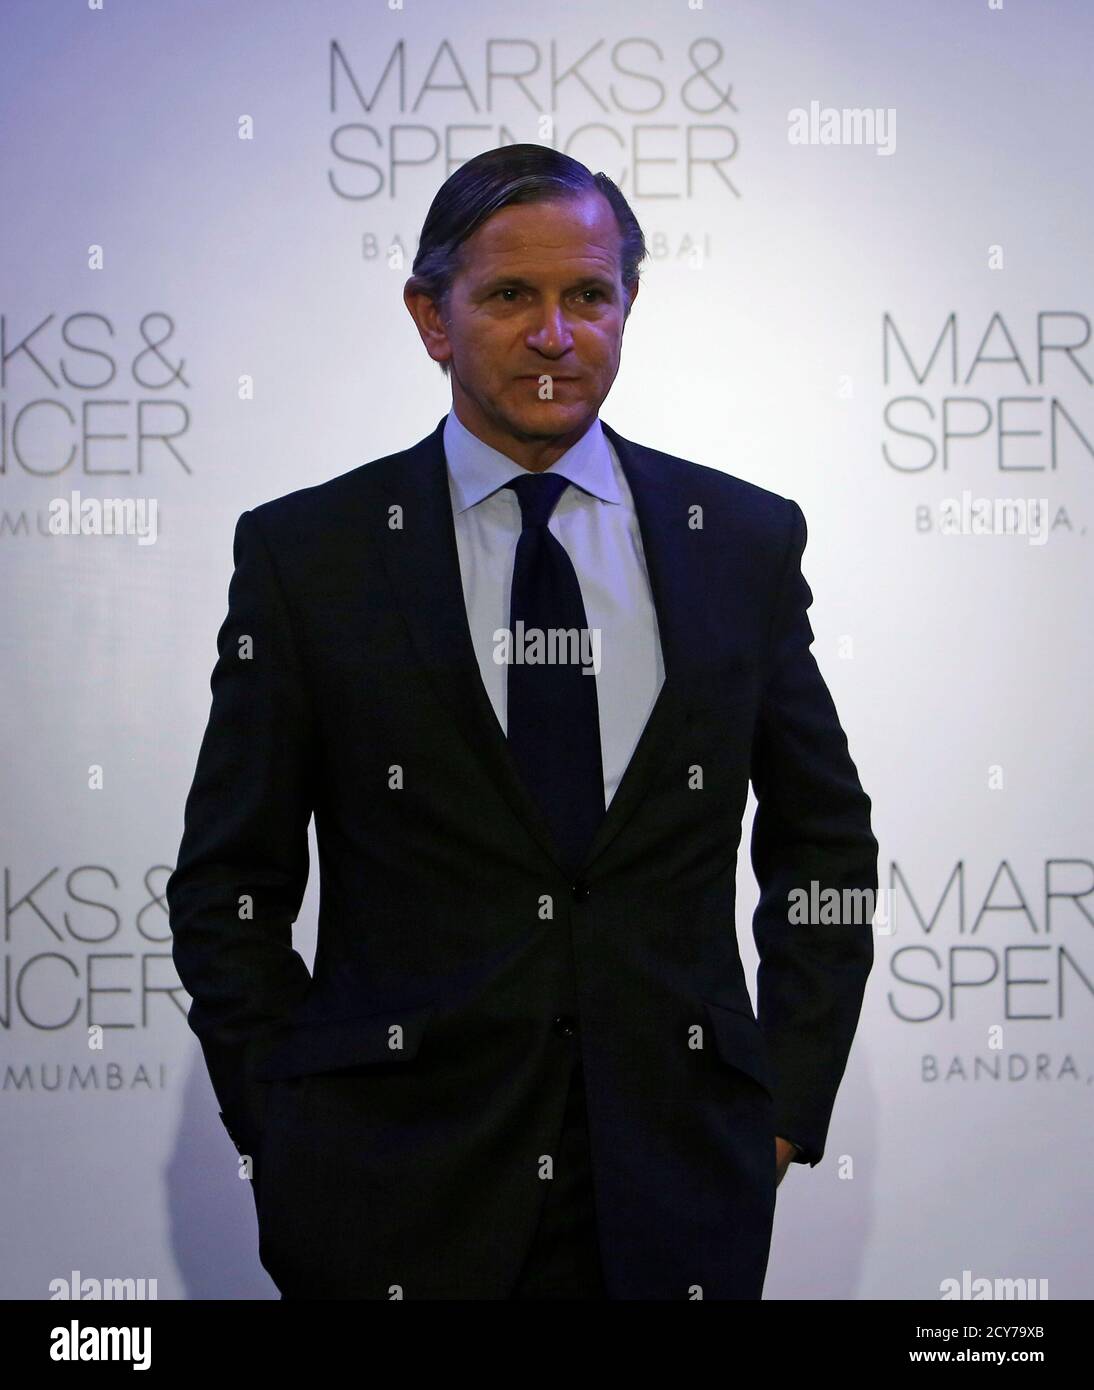 Marks & Spencer Chief Executive Marc Bolland poses for photographers at the  opening of a Marks & Spencer store in Mumbai November 11, 2013. Britain's  biggest clothing retailer Marks & Spencer wants